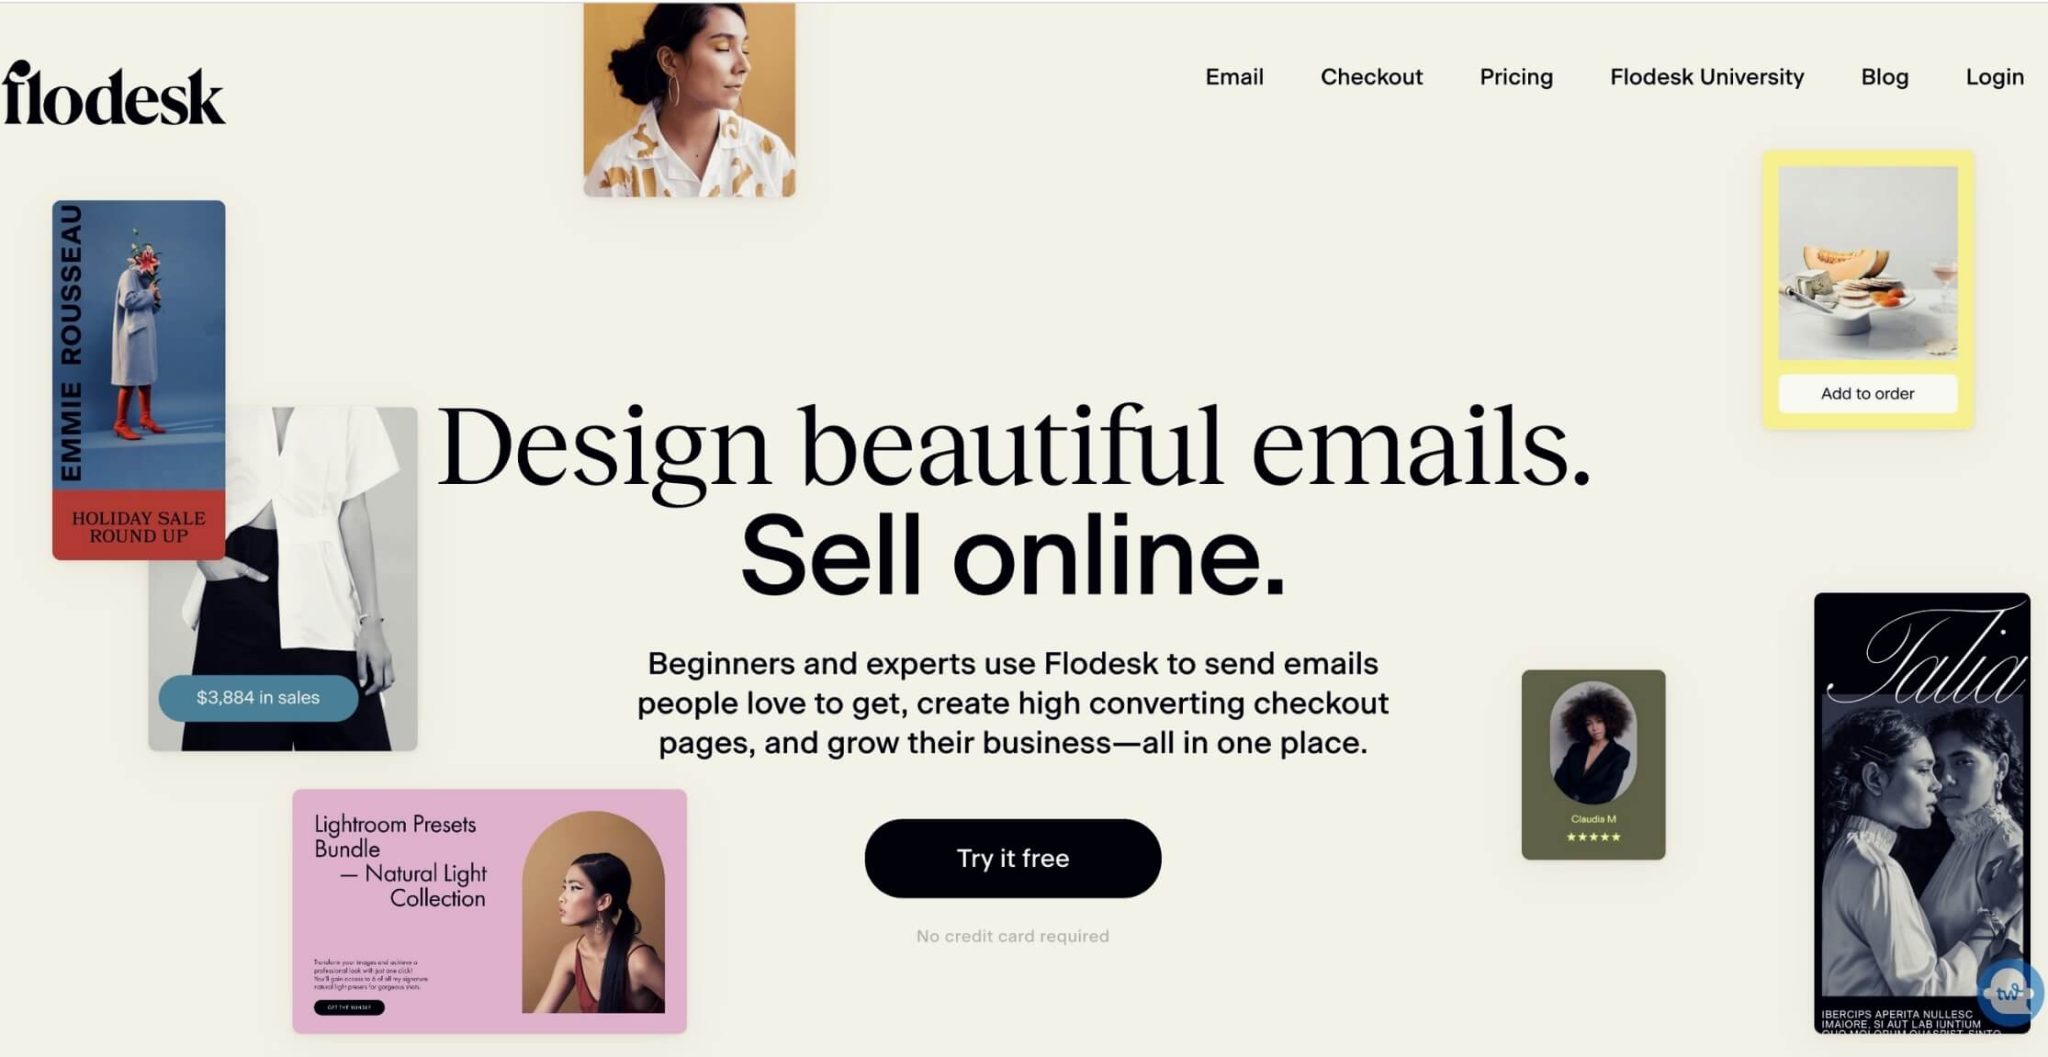 A screenshot from the home page of email marketing service Flodesk